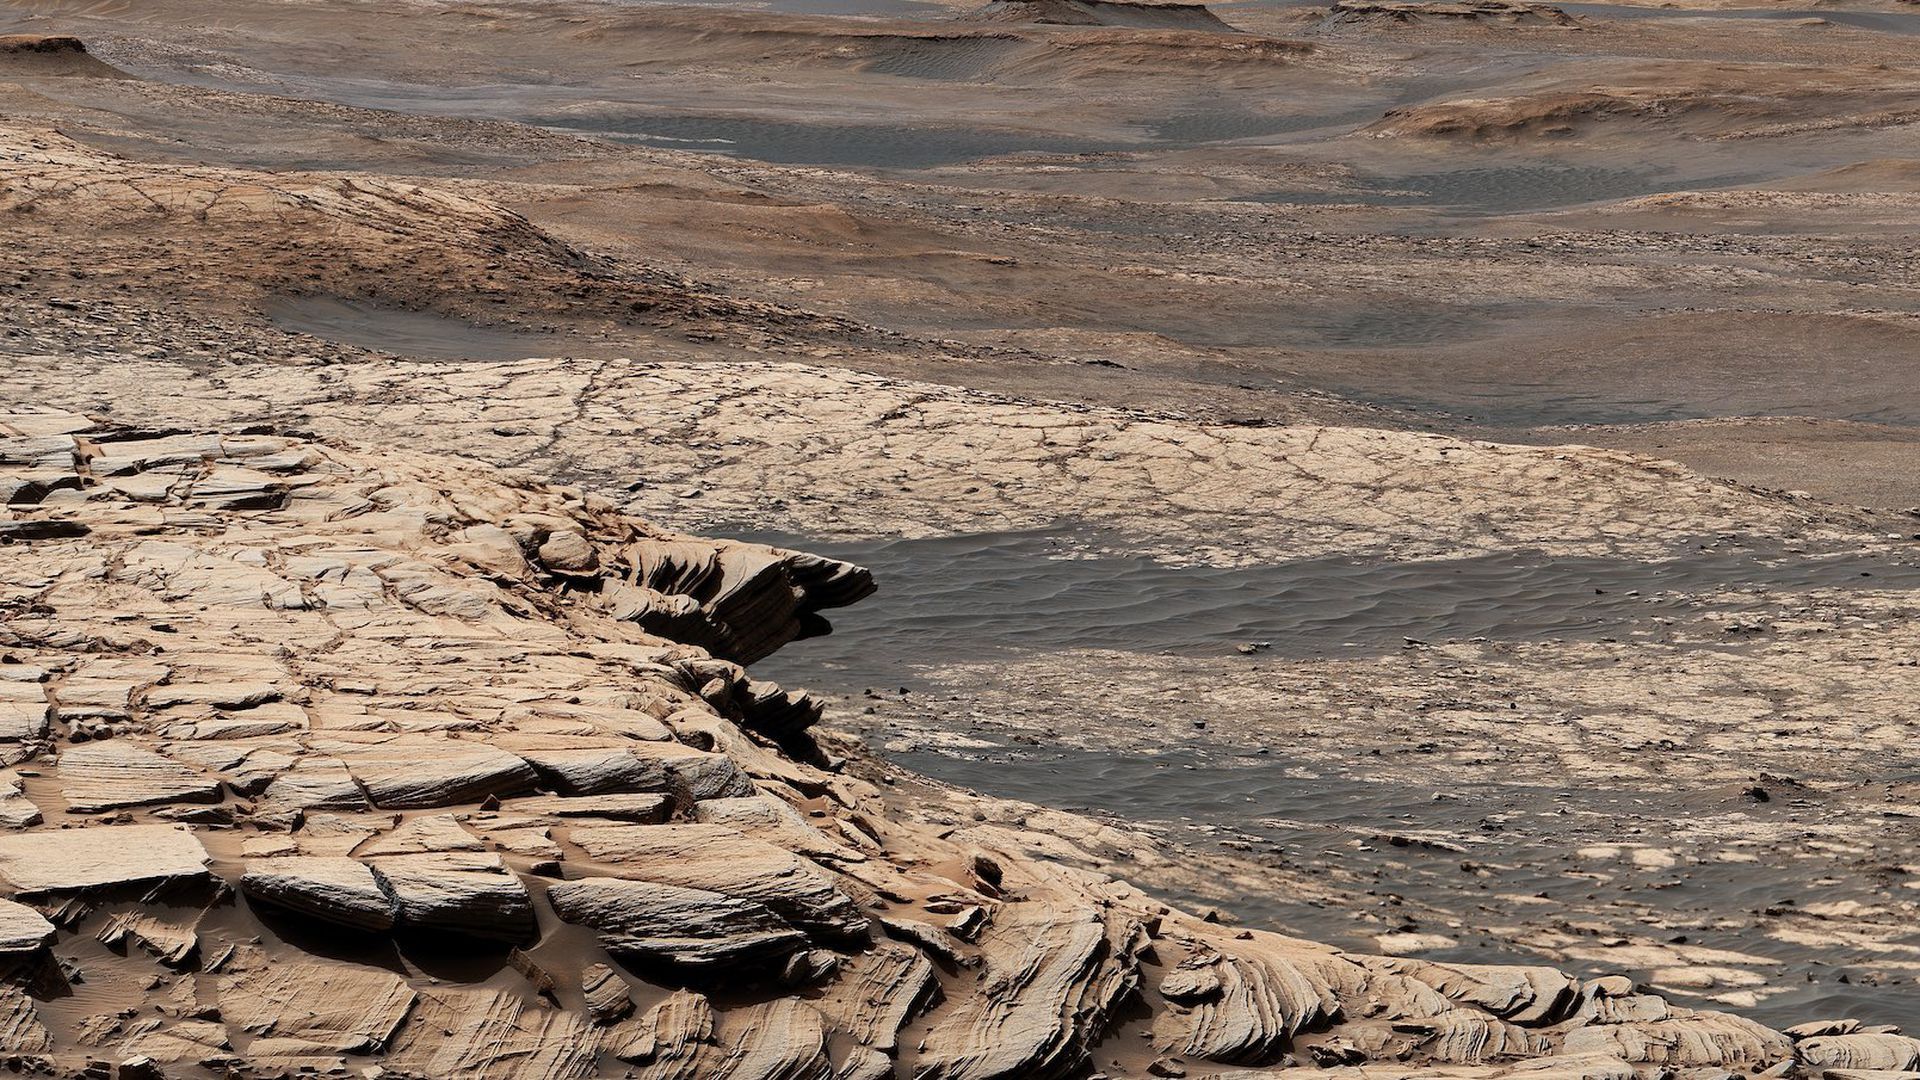 Picture of Mars as seen by the Curiosity rover.